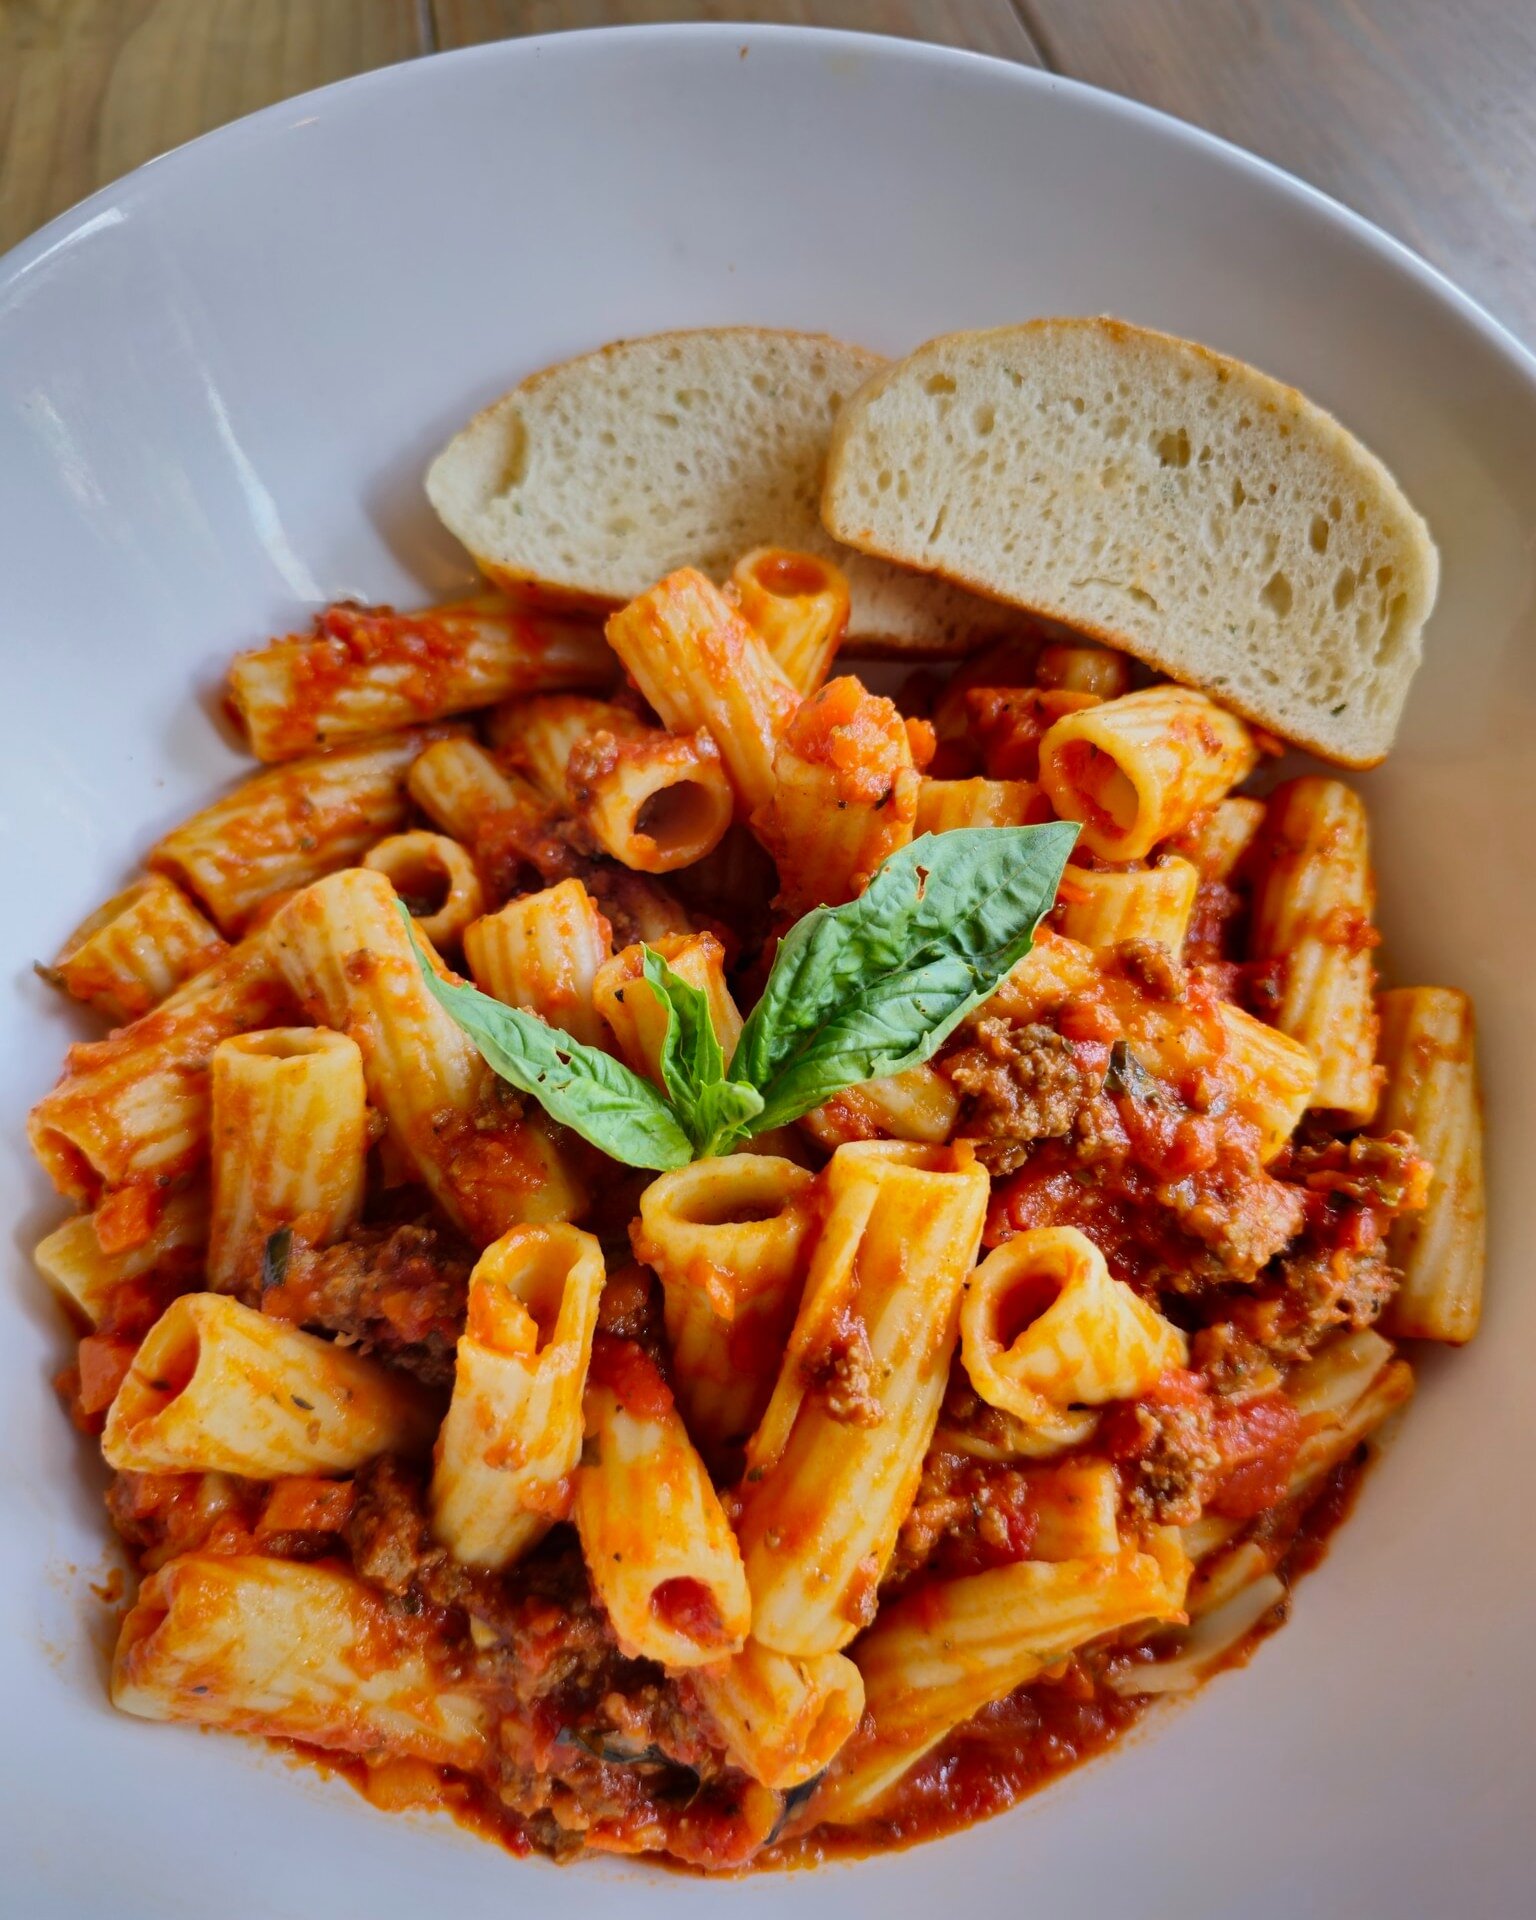 Sometimes, simpler is better. Tonight, we are keeping it simple- our special is Rigatoni Bolognese. Join us for this classic- we can't wait to serve you! 

#sundayspecial #pastaspecial #rigatonibolognese #shrimpfest #ShrimpFestival #ameliaisland #ame